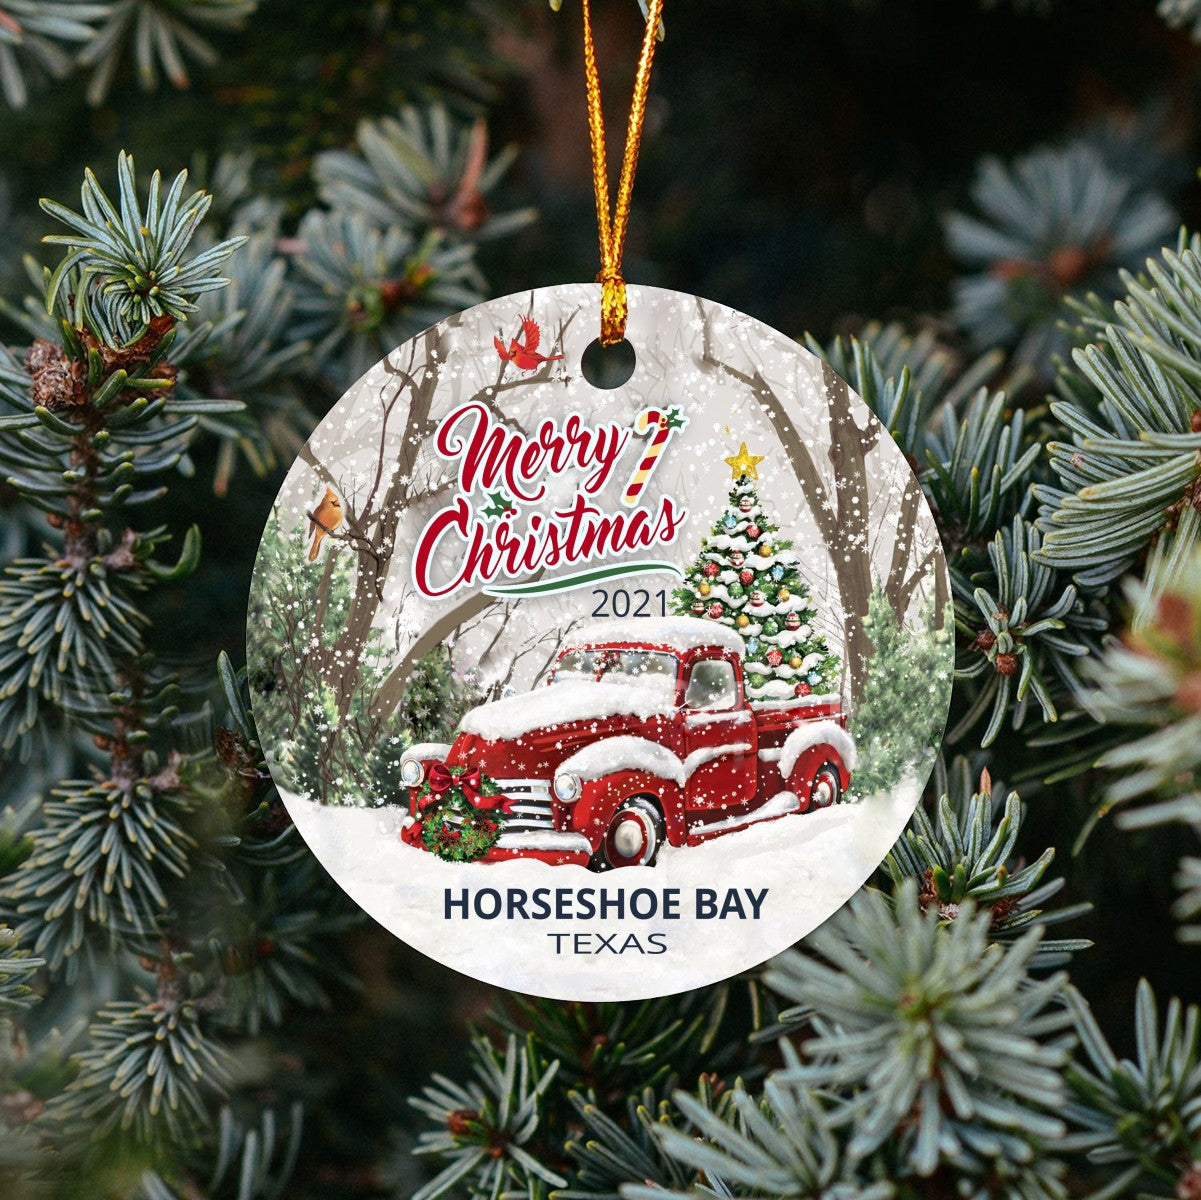 Christmas Tree Ornaments Horseshoe Bay - Ornament With Name City, State Horseshoe Bay Texas TX Ornament - Red Truck Xmas Ornaments 3'' Plastic Gift For Family, Friend And Housewarming